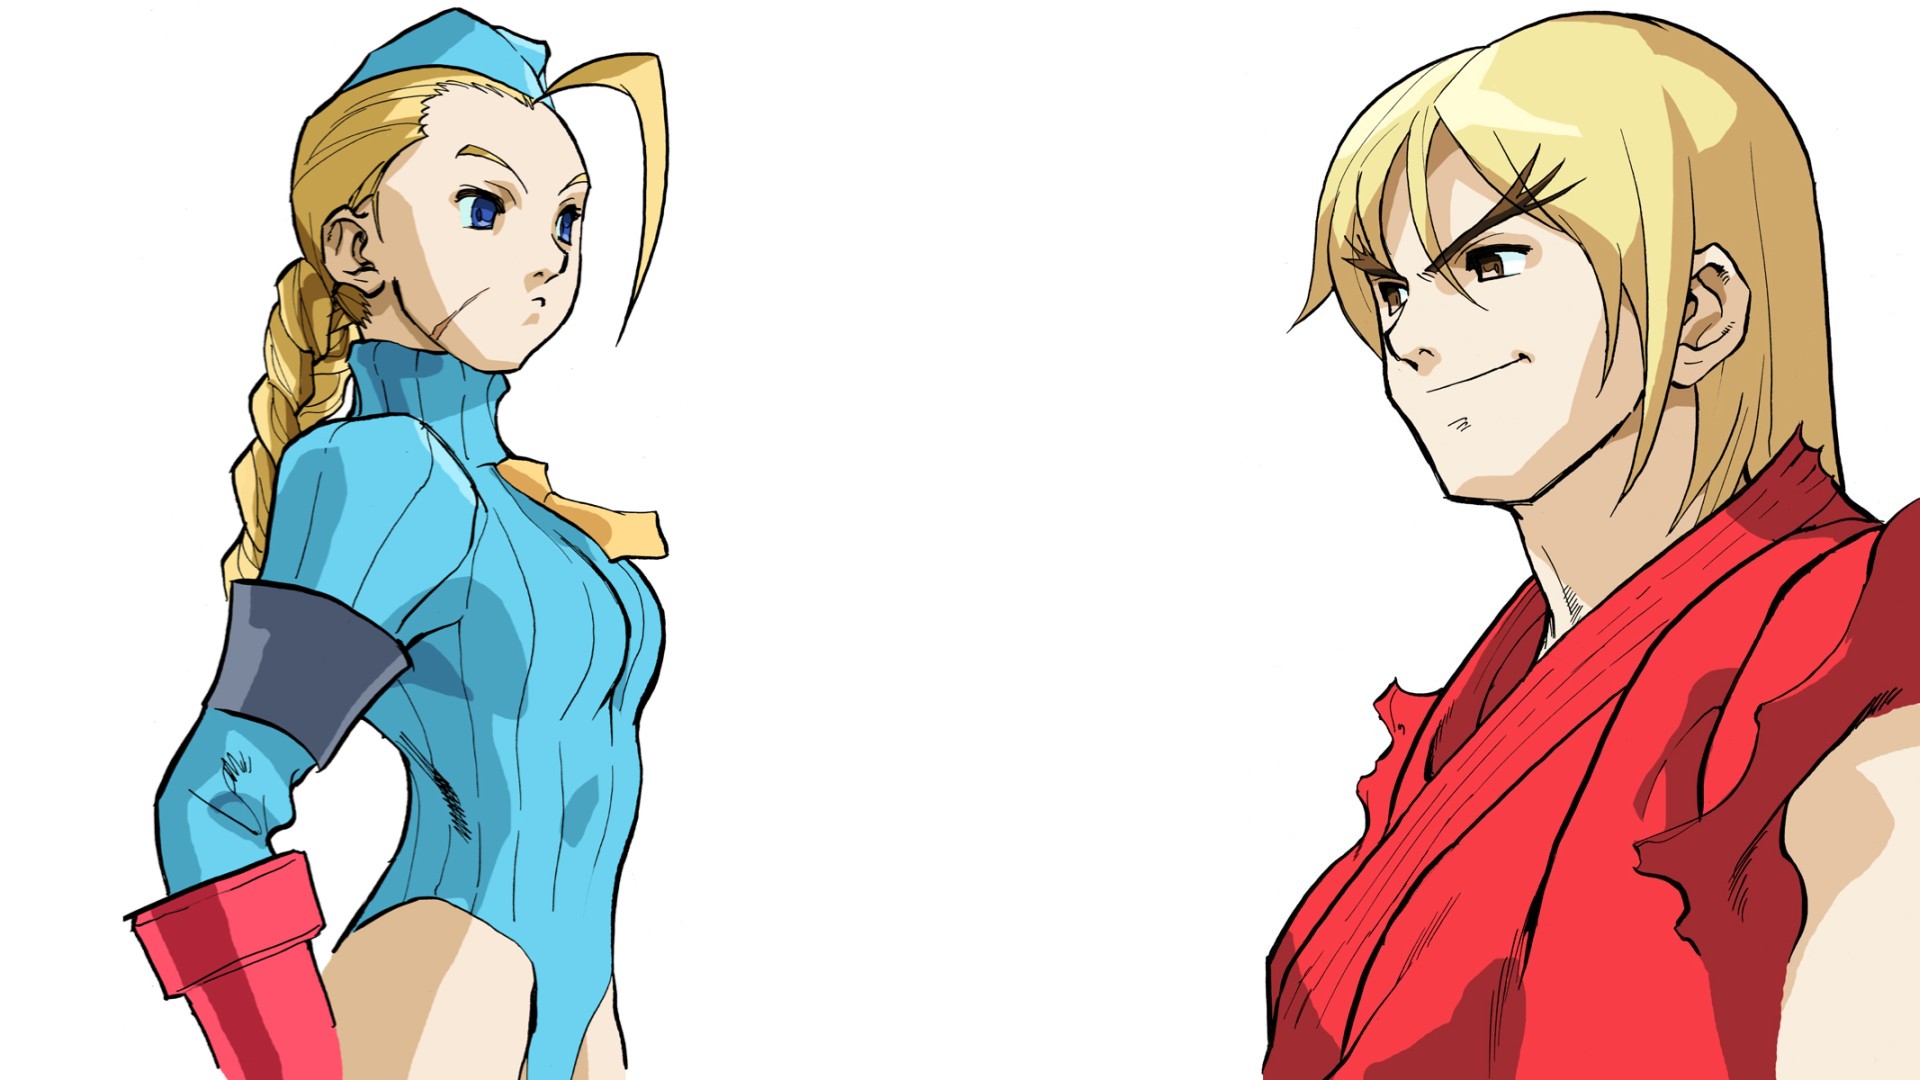 Video Game Street Fighter Alpha 3 HD Wallpaper | Background Image